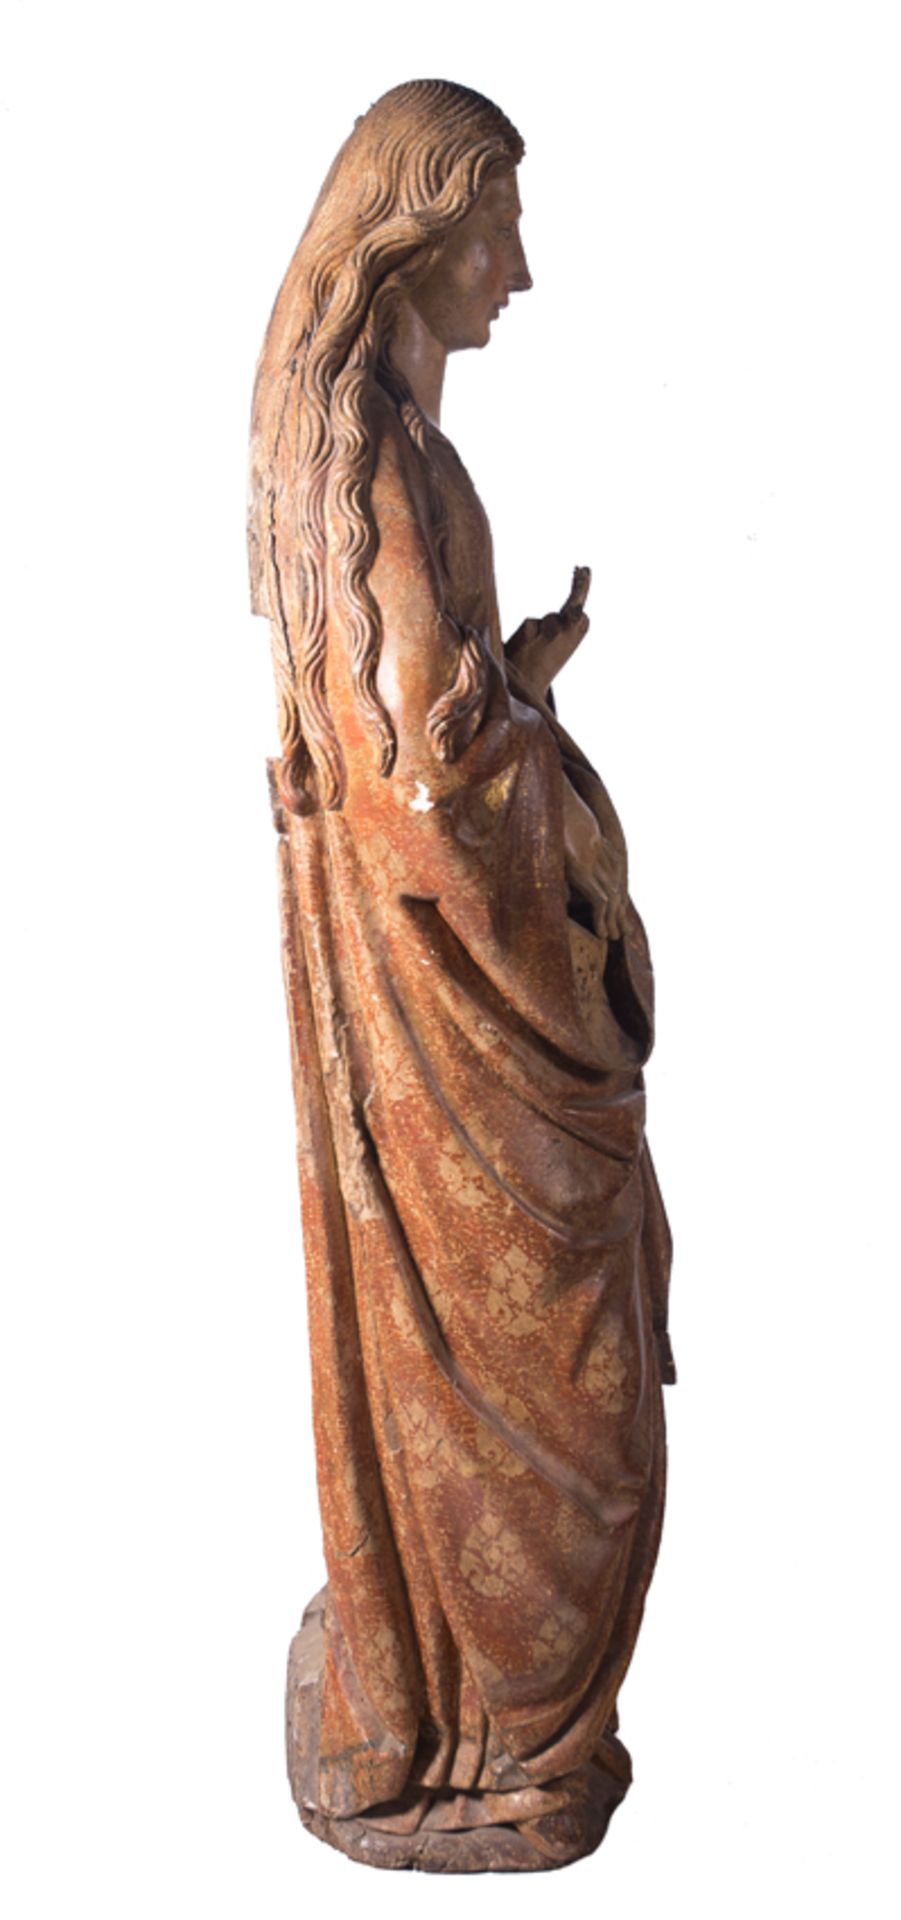 "Mary Magdalene". Carved and polychromed wooden sculpture. Hispanic-Flemish School. 15th century. - Image 8 of 9